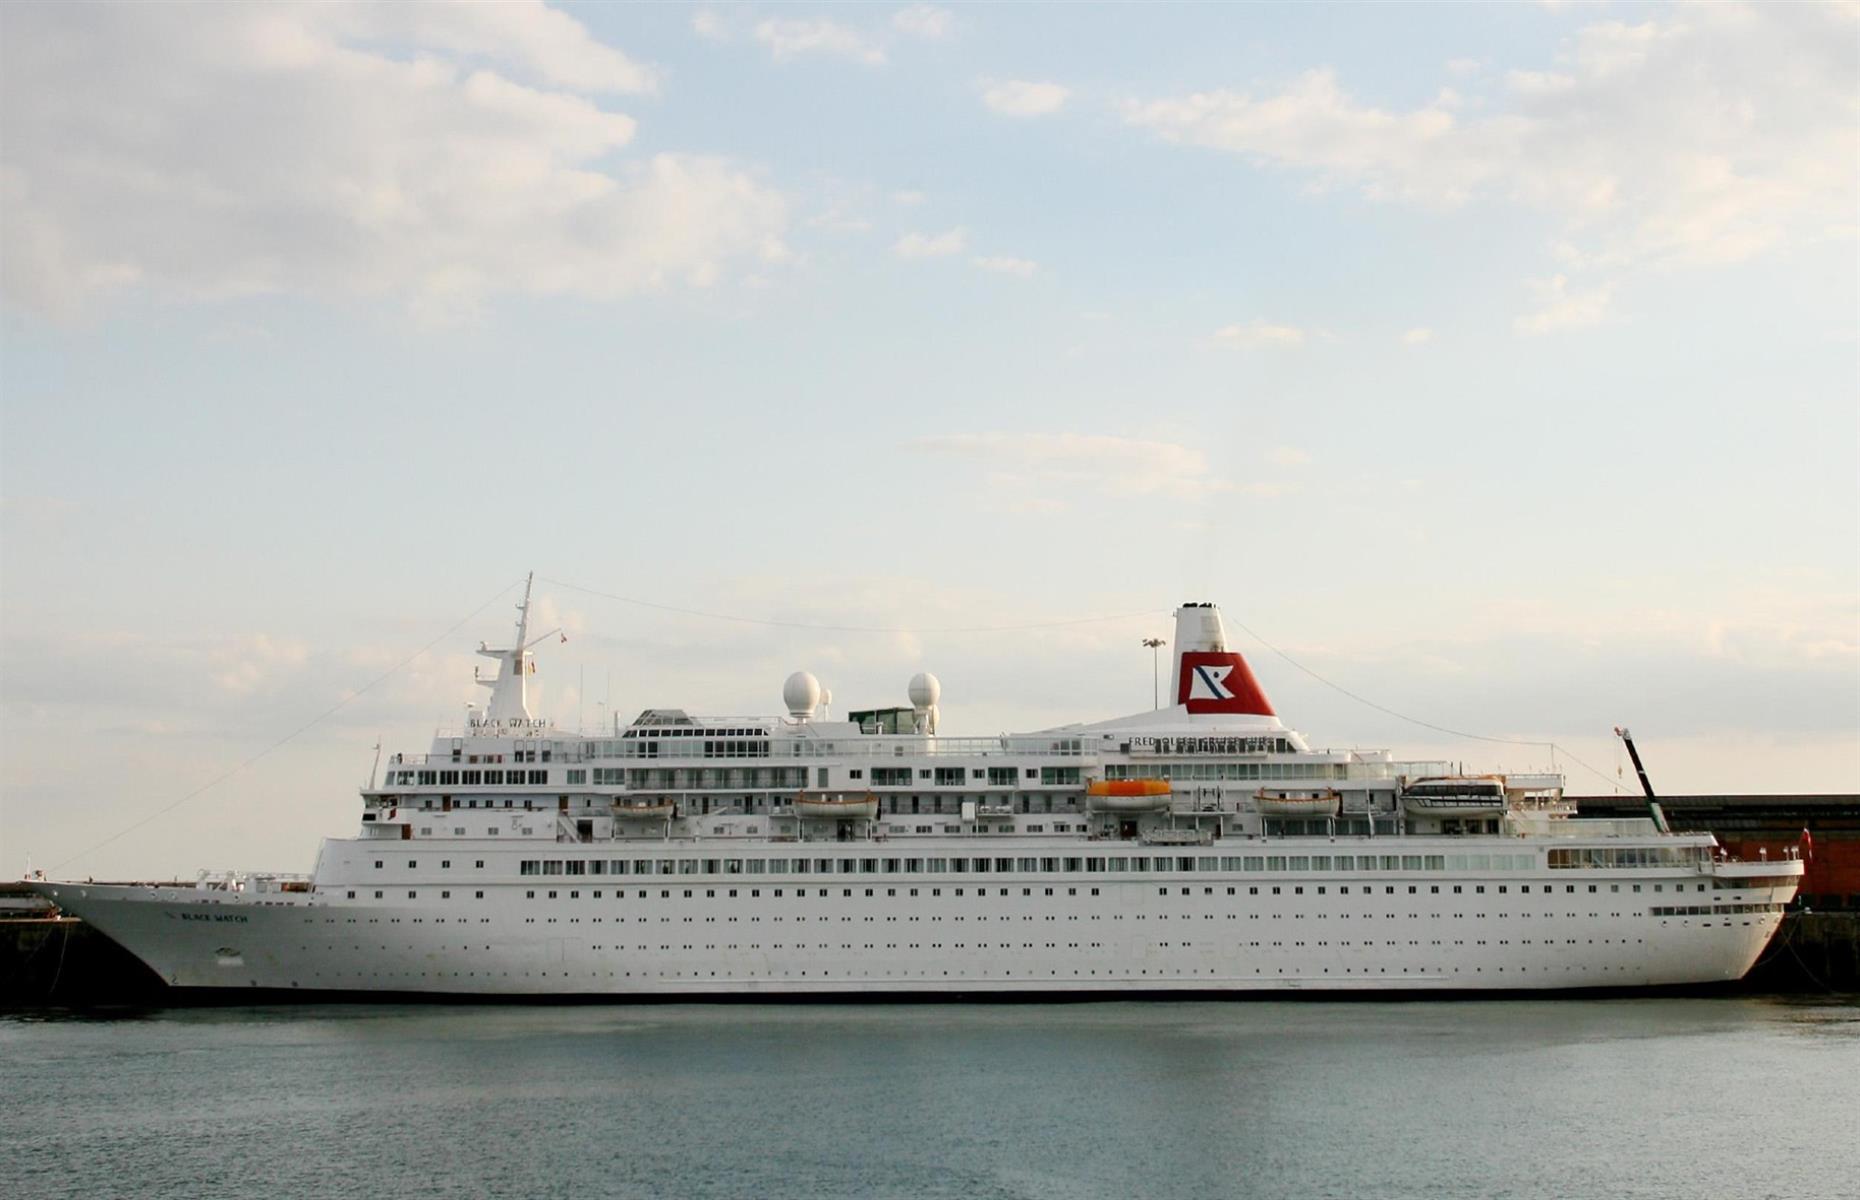 <p>Launched in the early 1970s, the 804-passenger Black Watch was originally owned by Royal Viking Line. With its generous promenade and public spaces, it was once considered among the most luxurious ships in the world. </p>